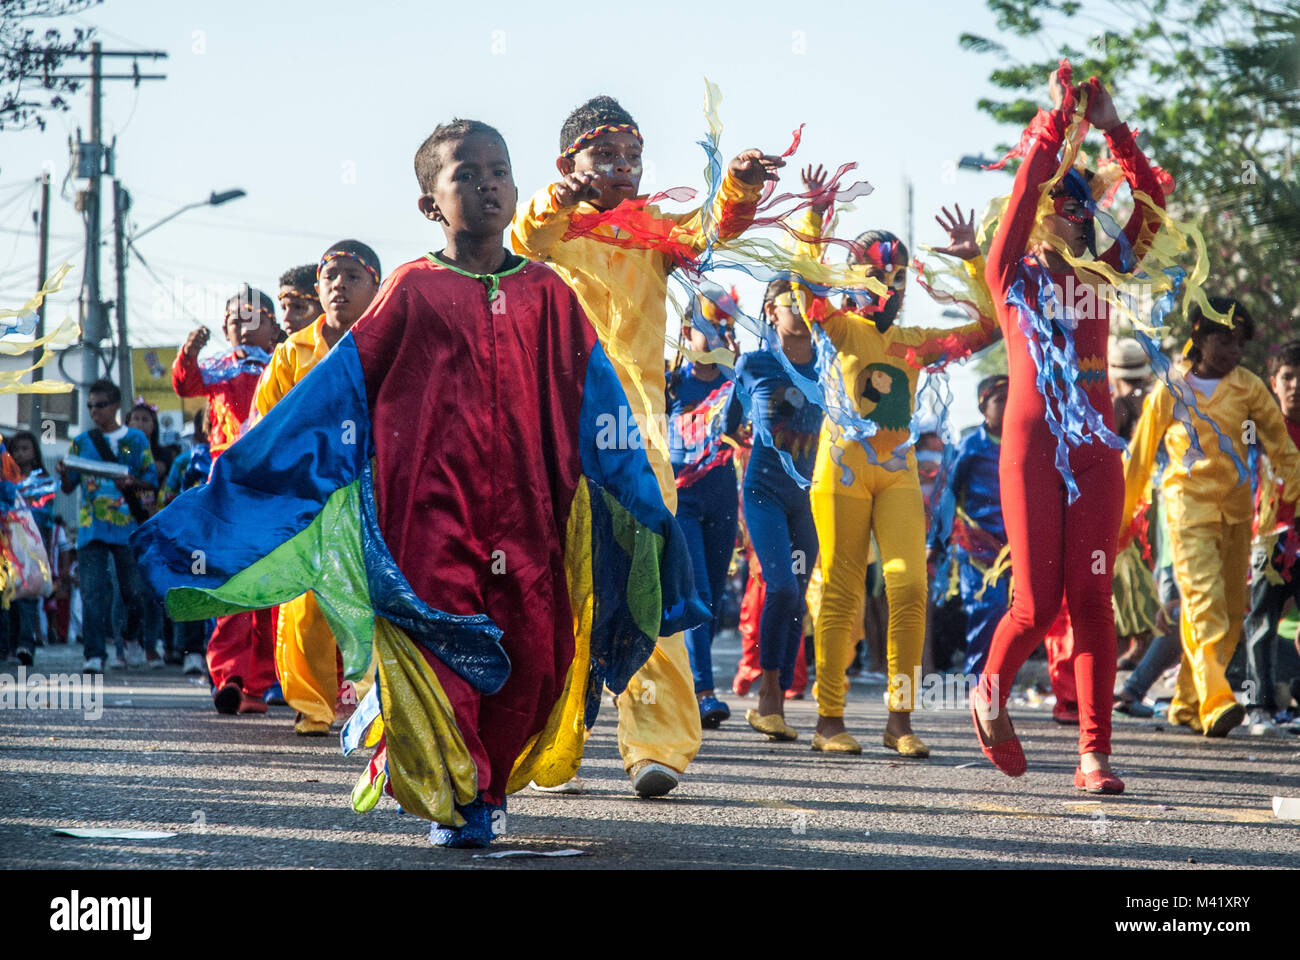 Children wearing colorful costumes and dancing and participating in a parade during the Barranquilla Carnival Stock Photo